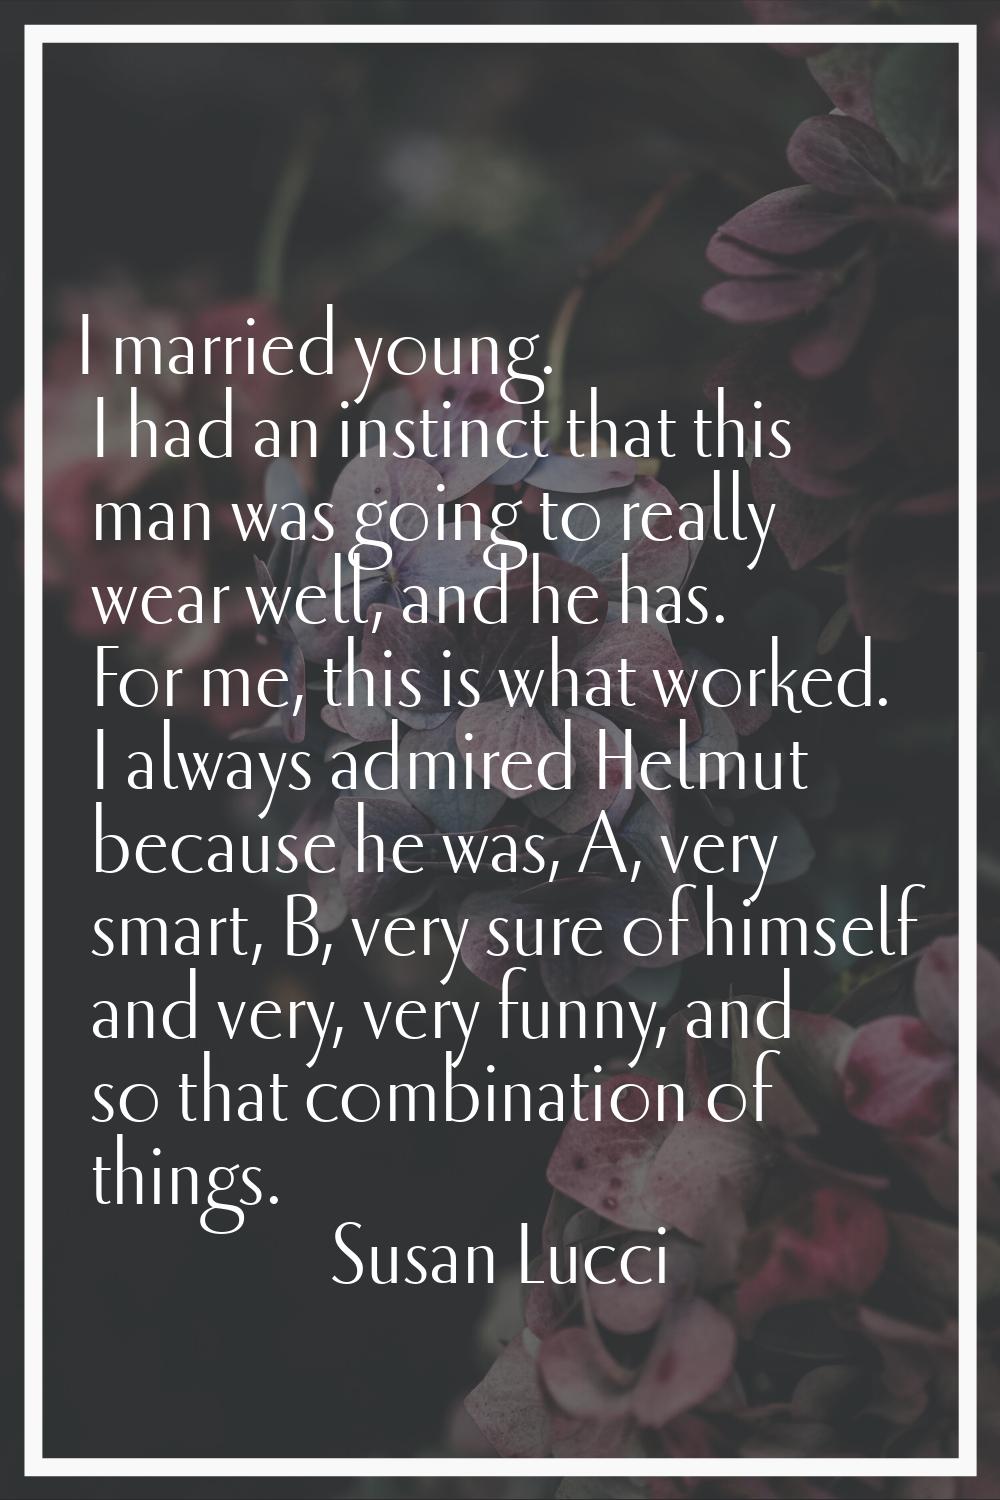 I married young. I had an instinct that this man was going to really wear well, and he has. For me,